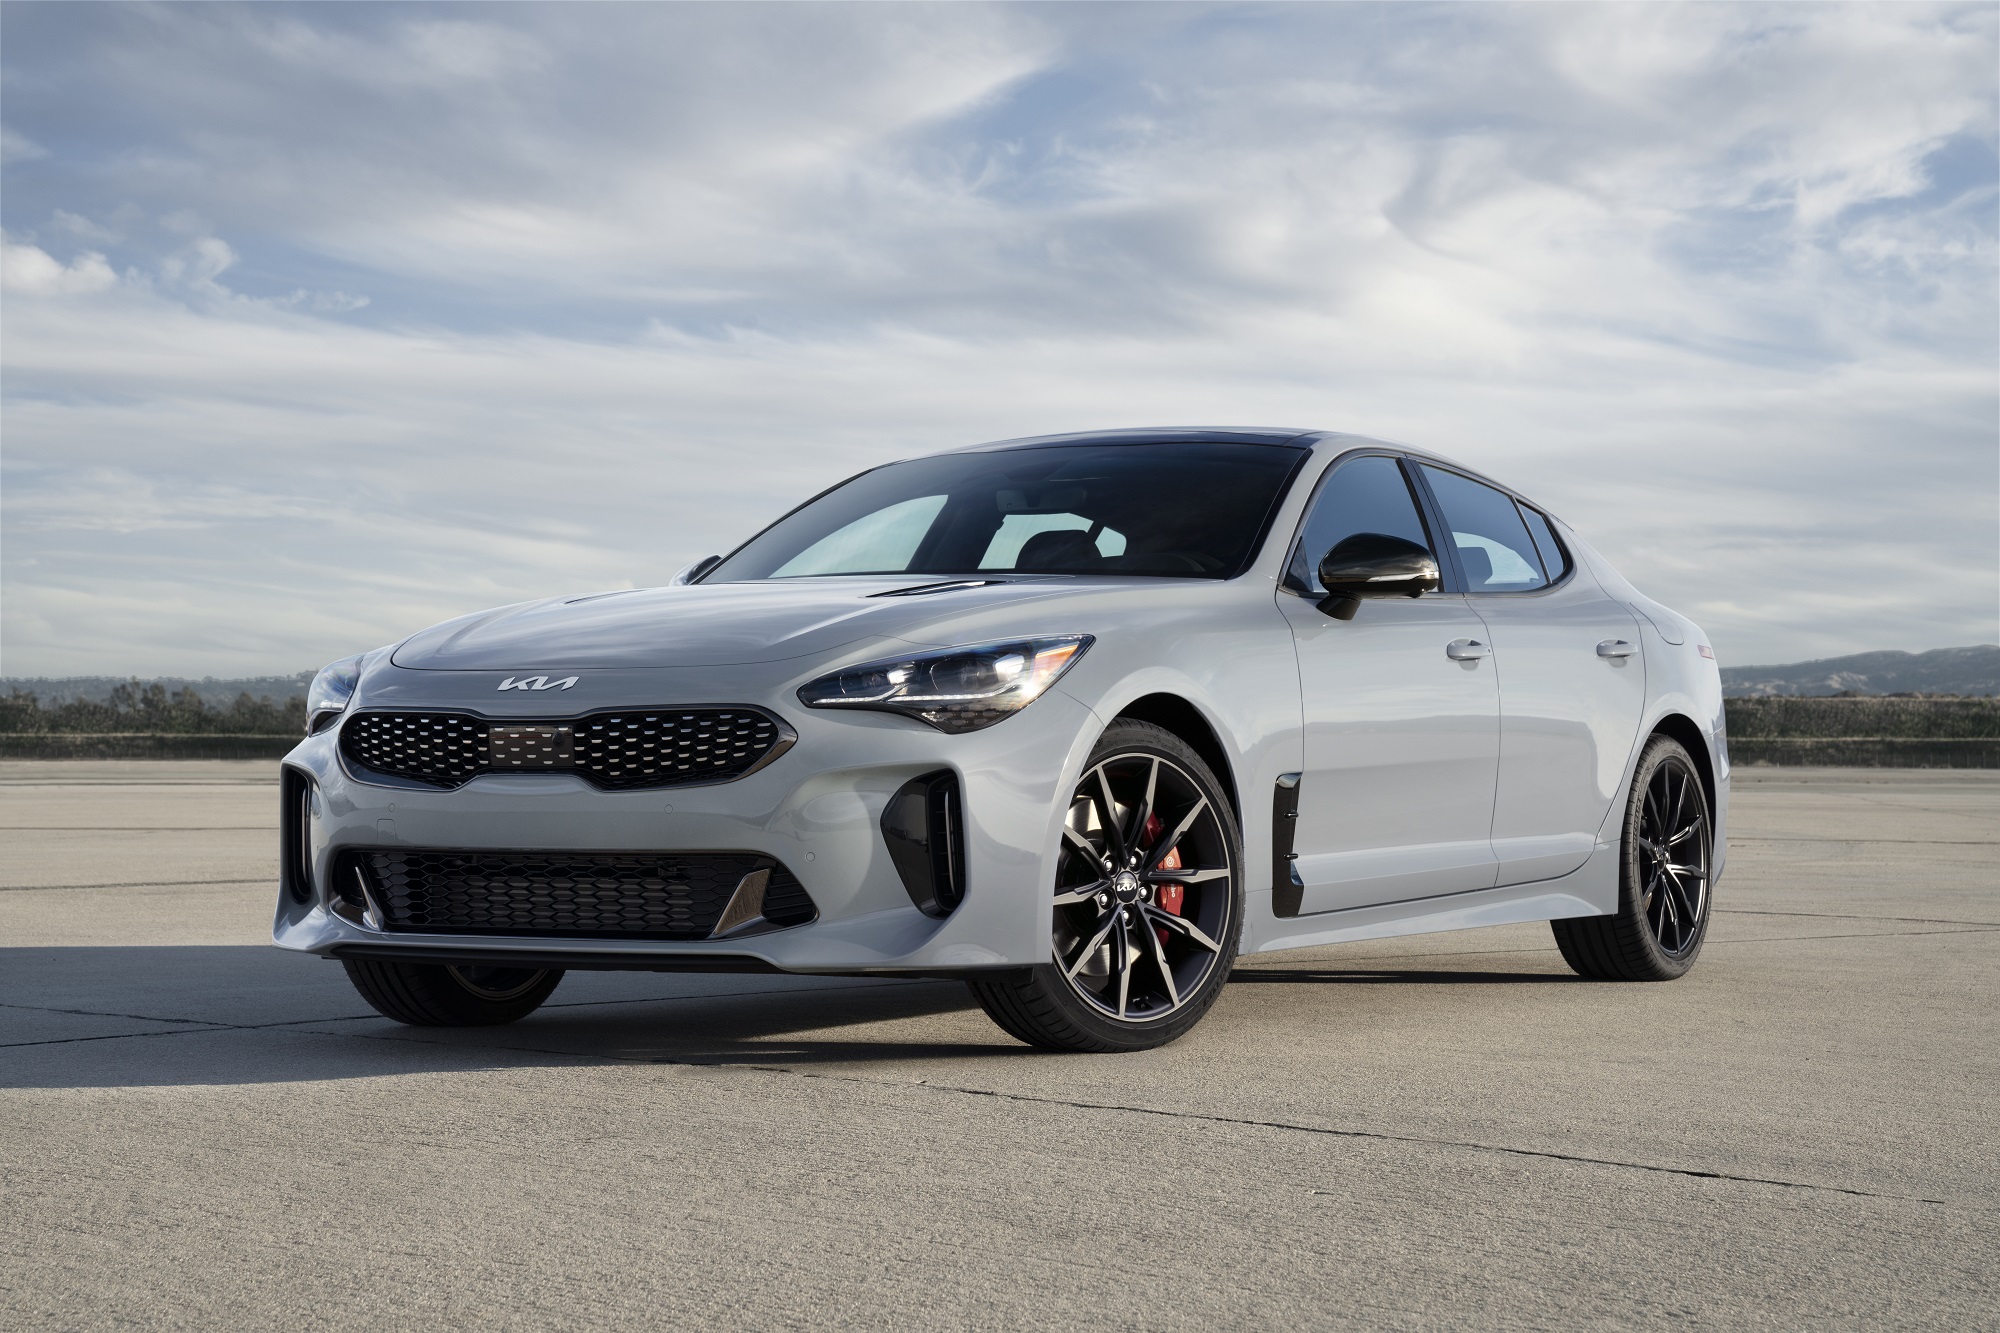 The Kia Stinger has a couple issues that keep it from walking all over the Alfa Romeo Giulia.